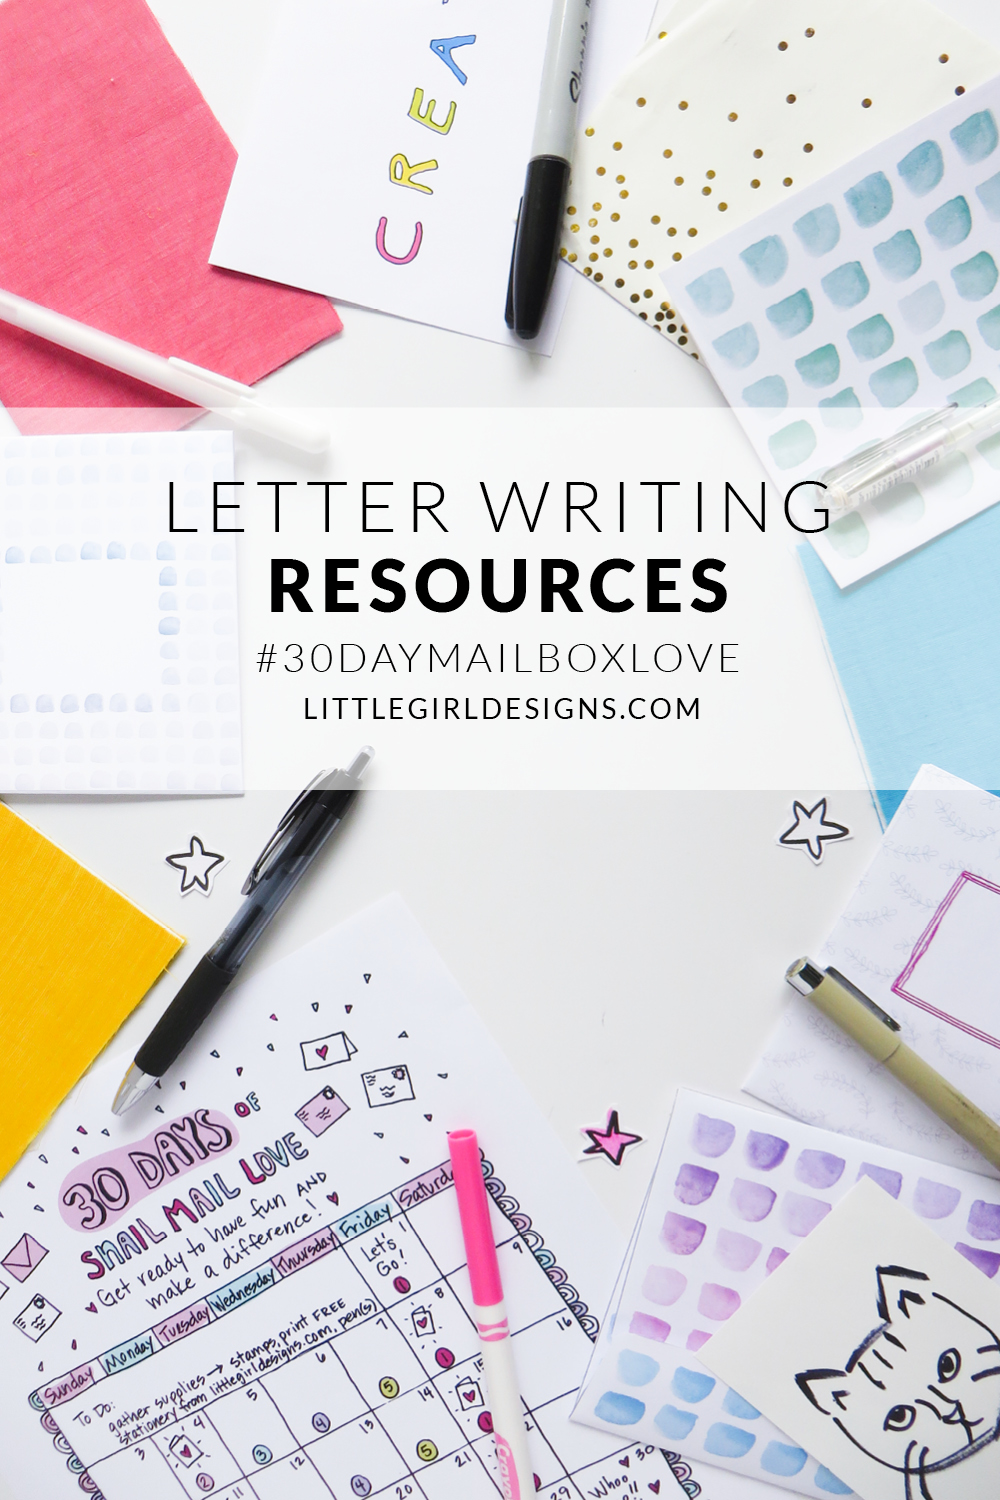 Letter-writing Resources